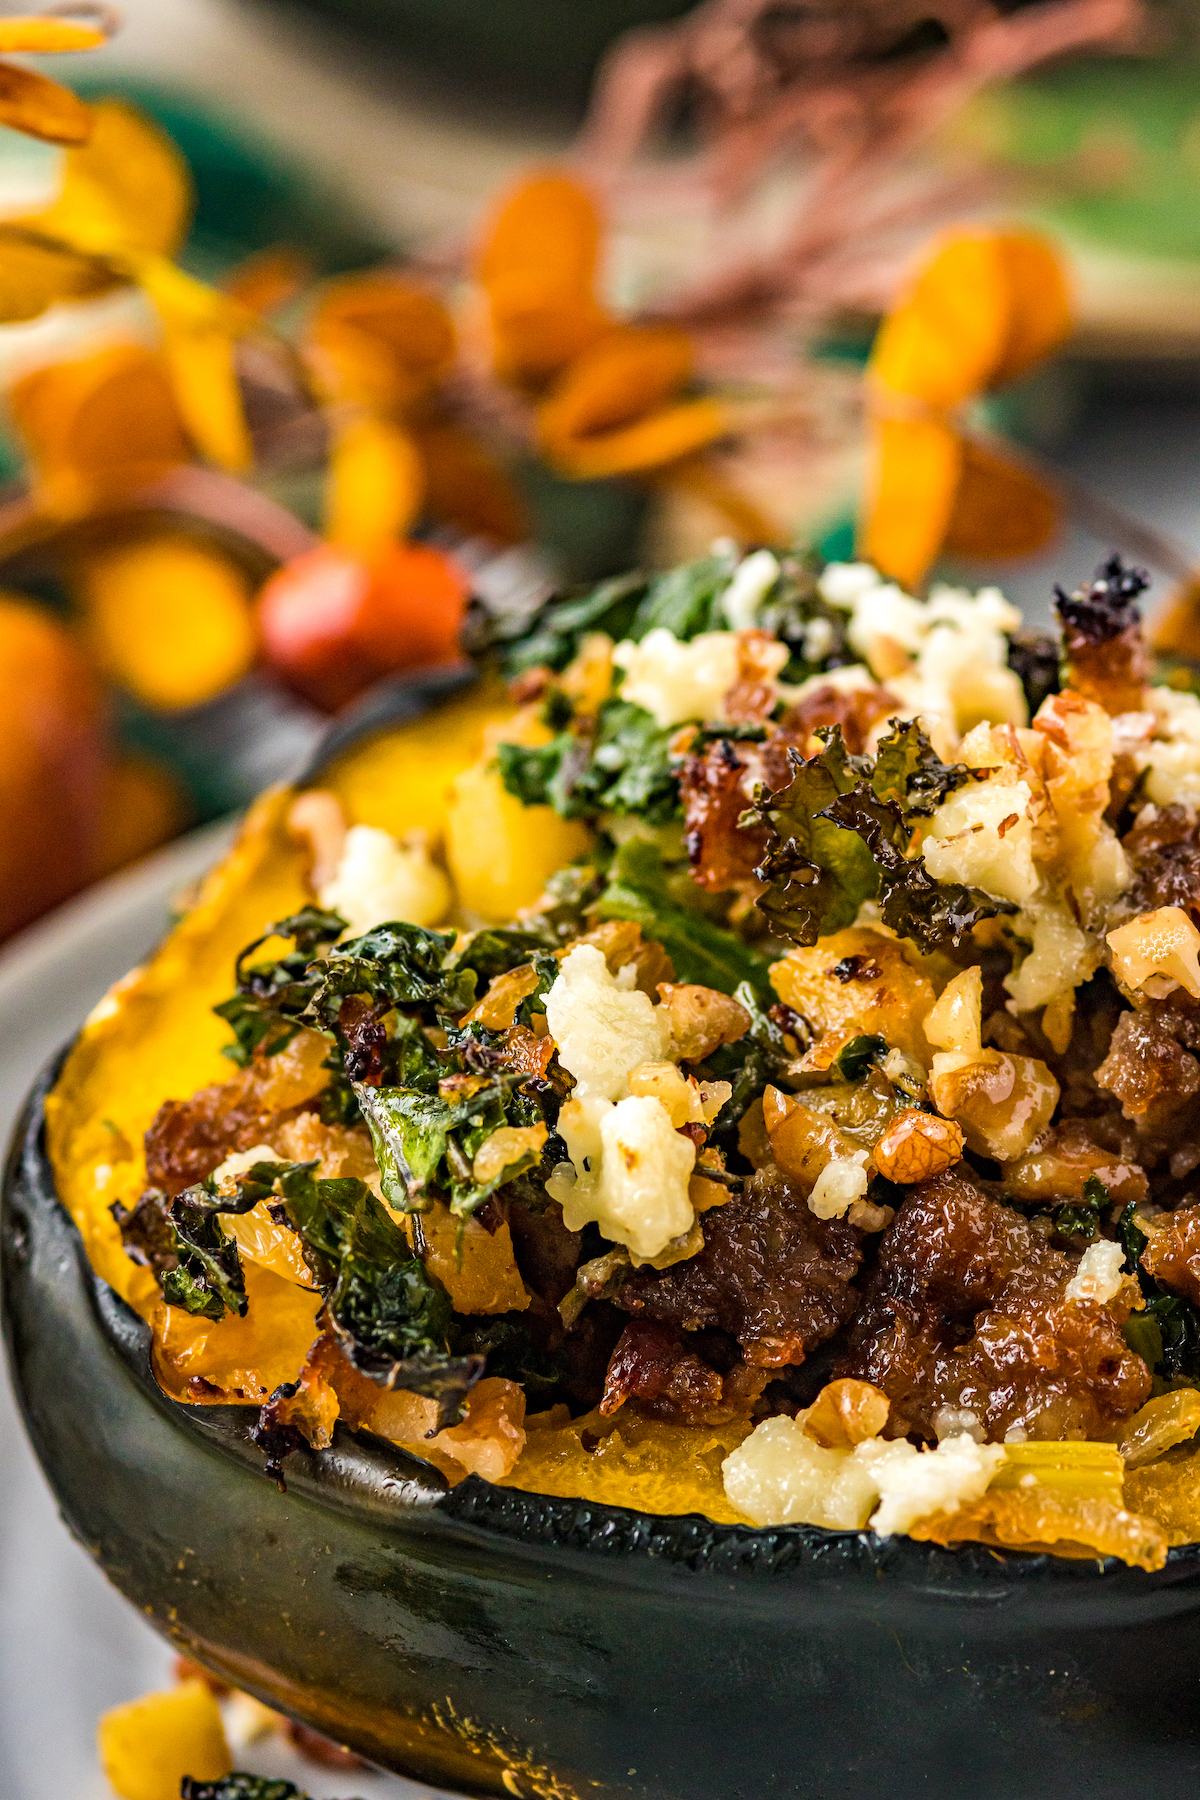 A close-up shot of an acorn squash stuffed with sausage, apples, kale, and more, topped with feta and nuts. Autumn decorations are in the background of the picture.